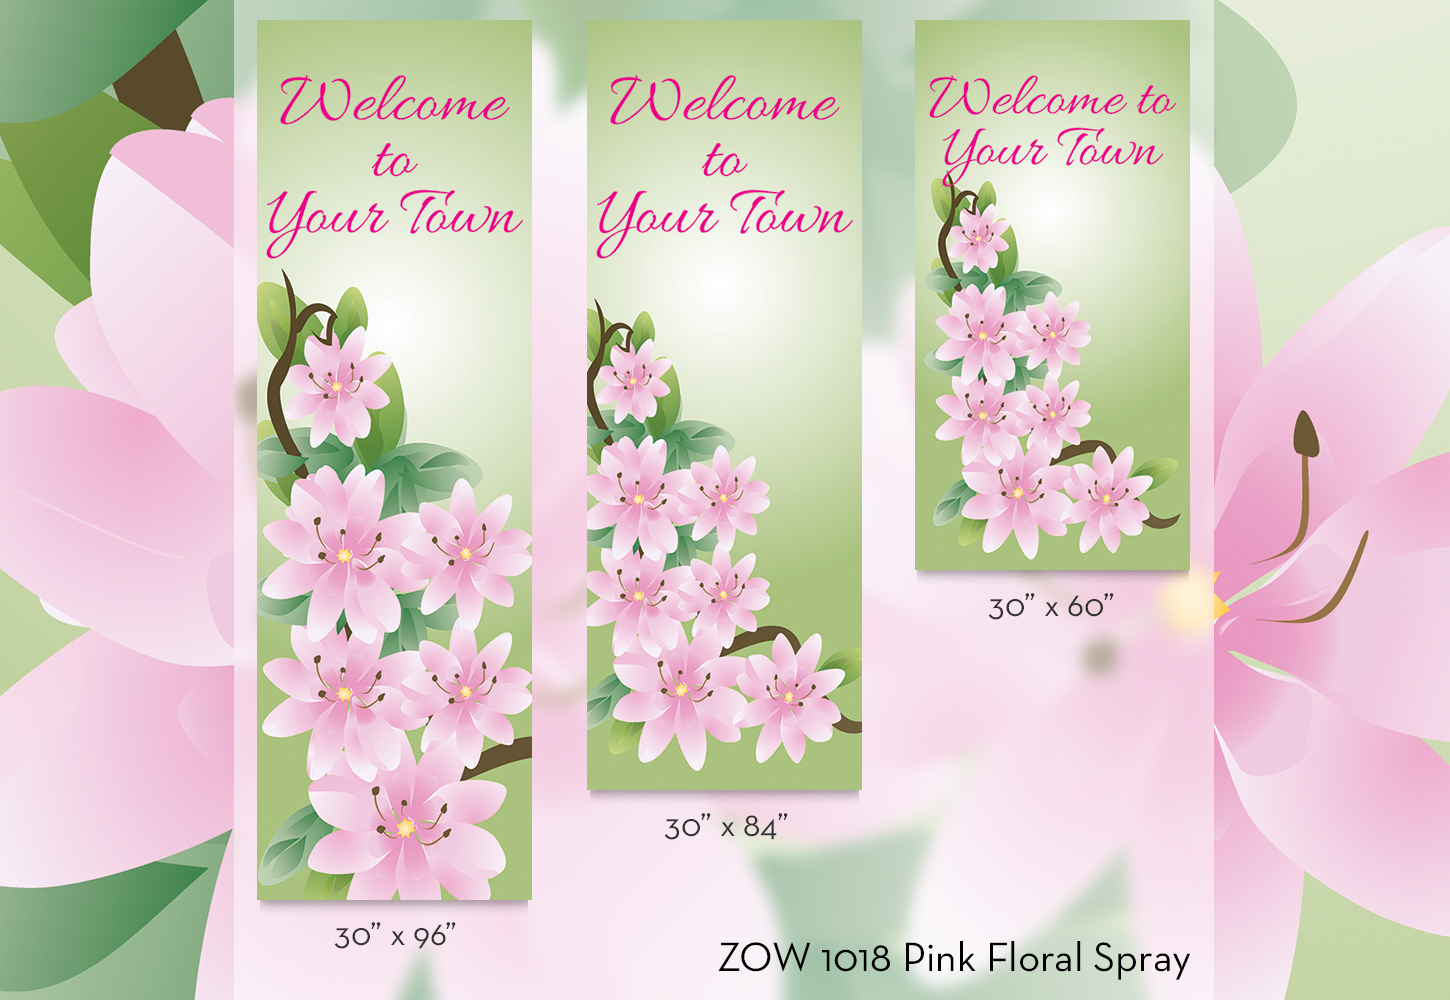 ZOW 1018 Pink Floral Spray